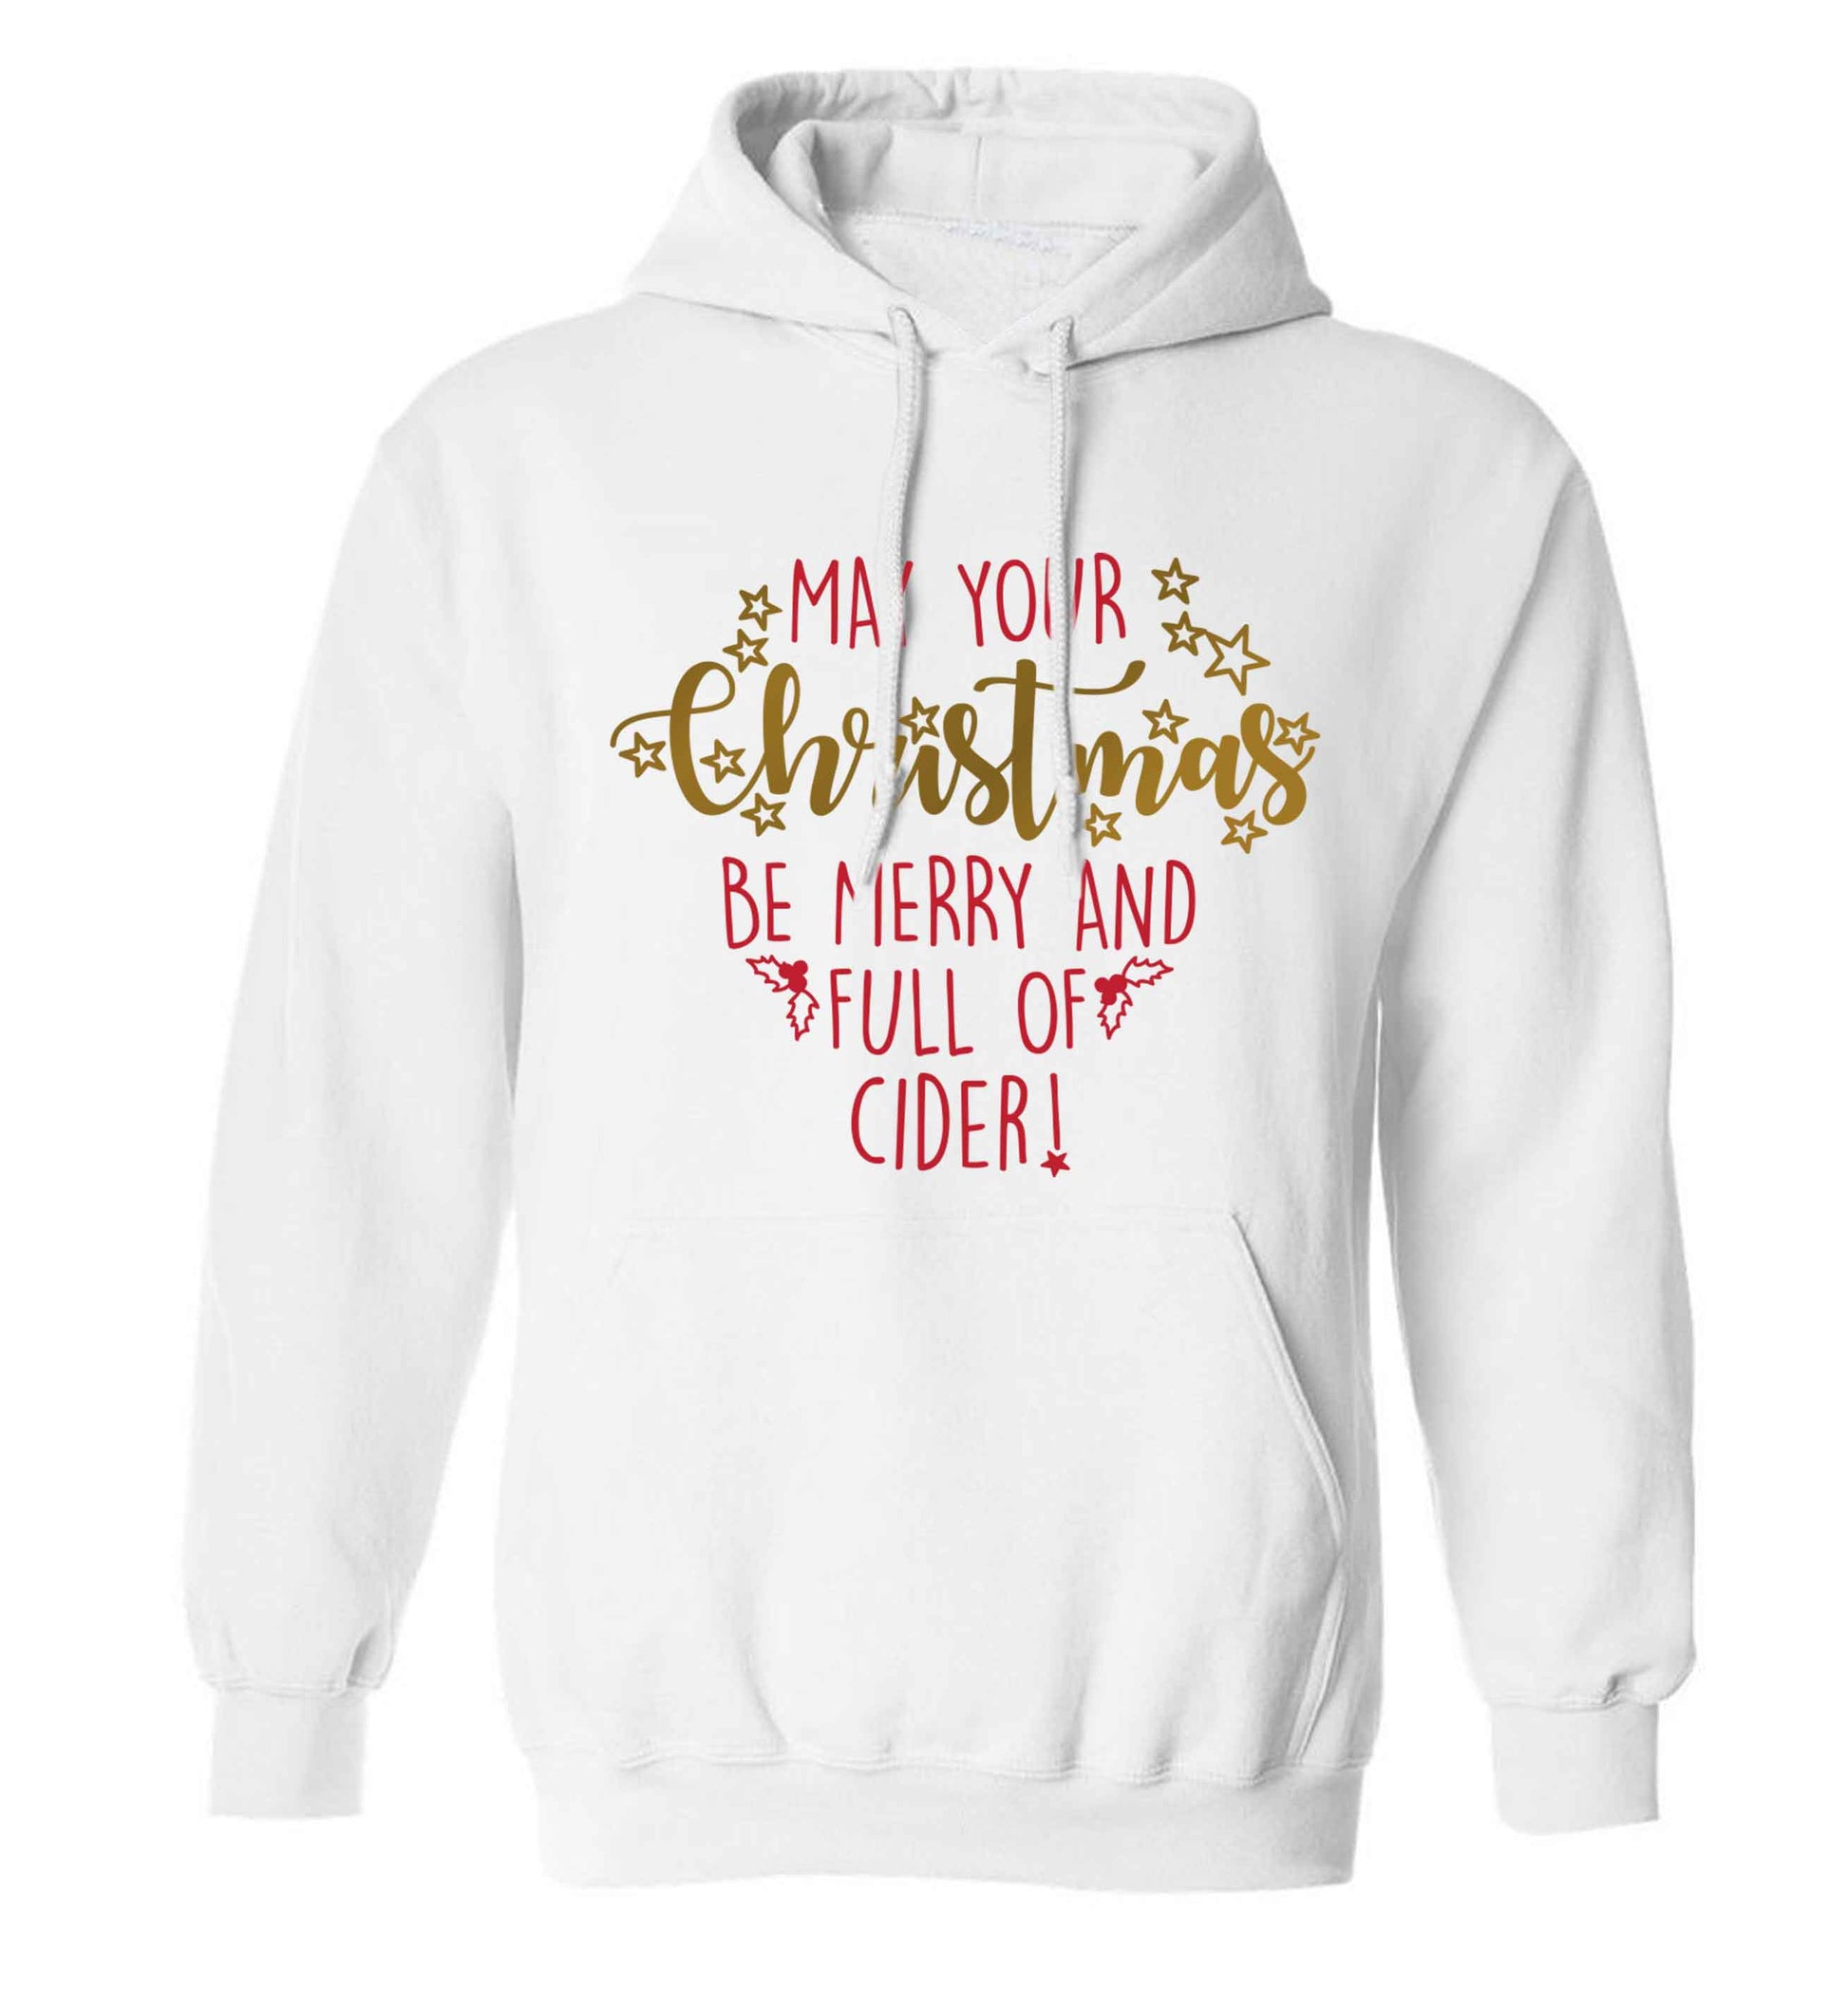 May your Christmas be merry and full of cider adults unisex white hoodie 2XL